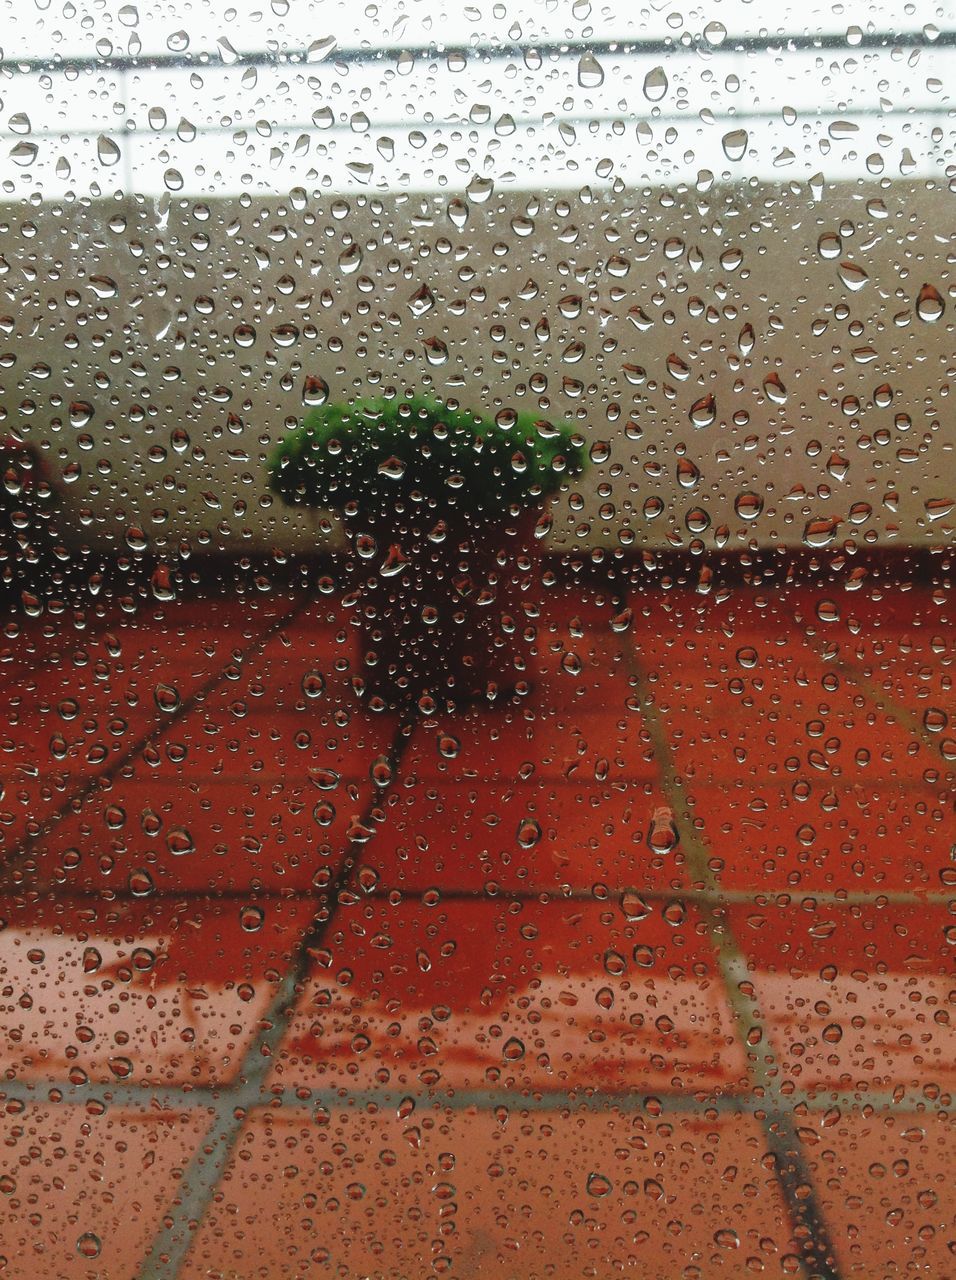 wet, drop, window, water, rain, transparent, glass - material, season, indoors, weather, raindrop, glass, full frame, transportation, car, monsoon, backgrounds, close-up, sky, focus on foreground